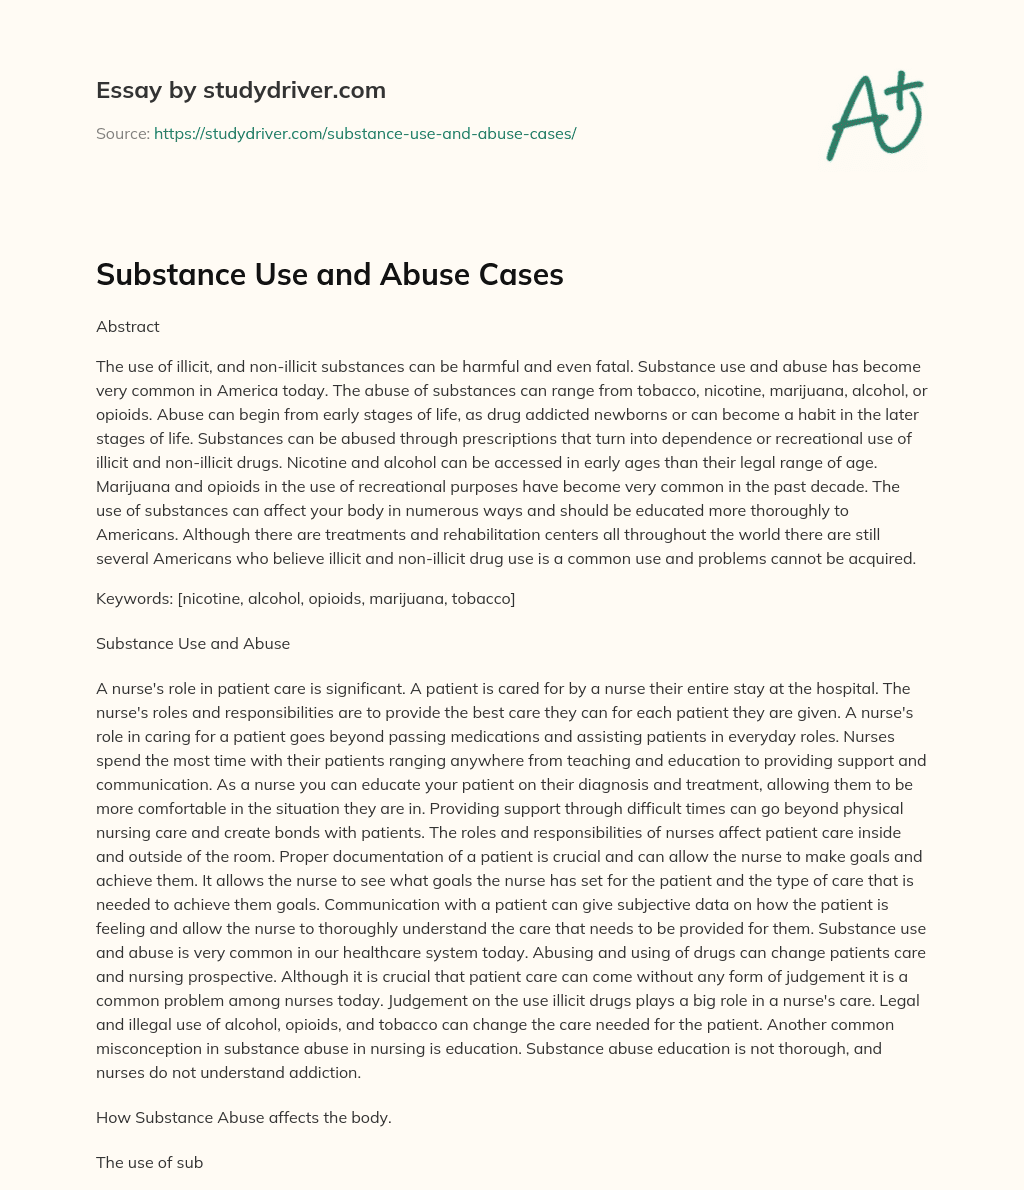 Substance Use and Abuse Cases essay